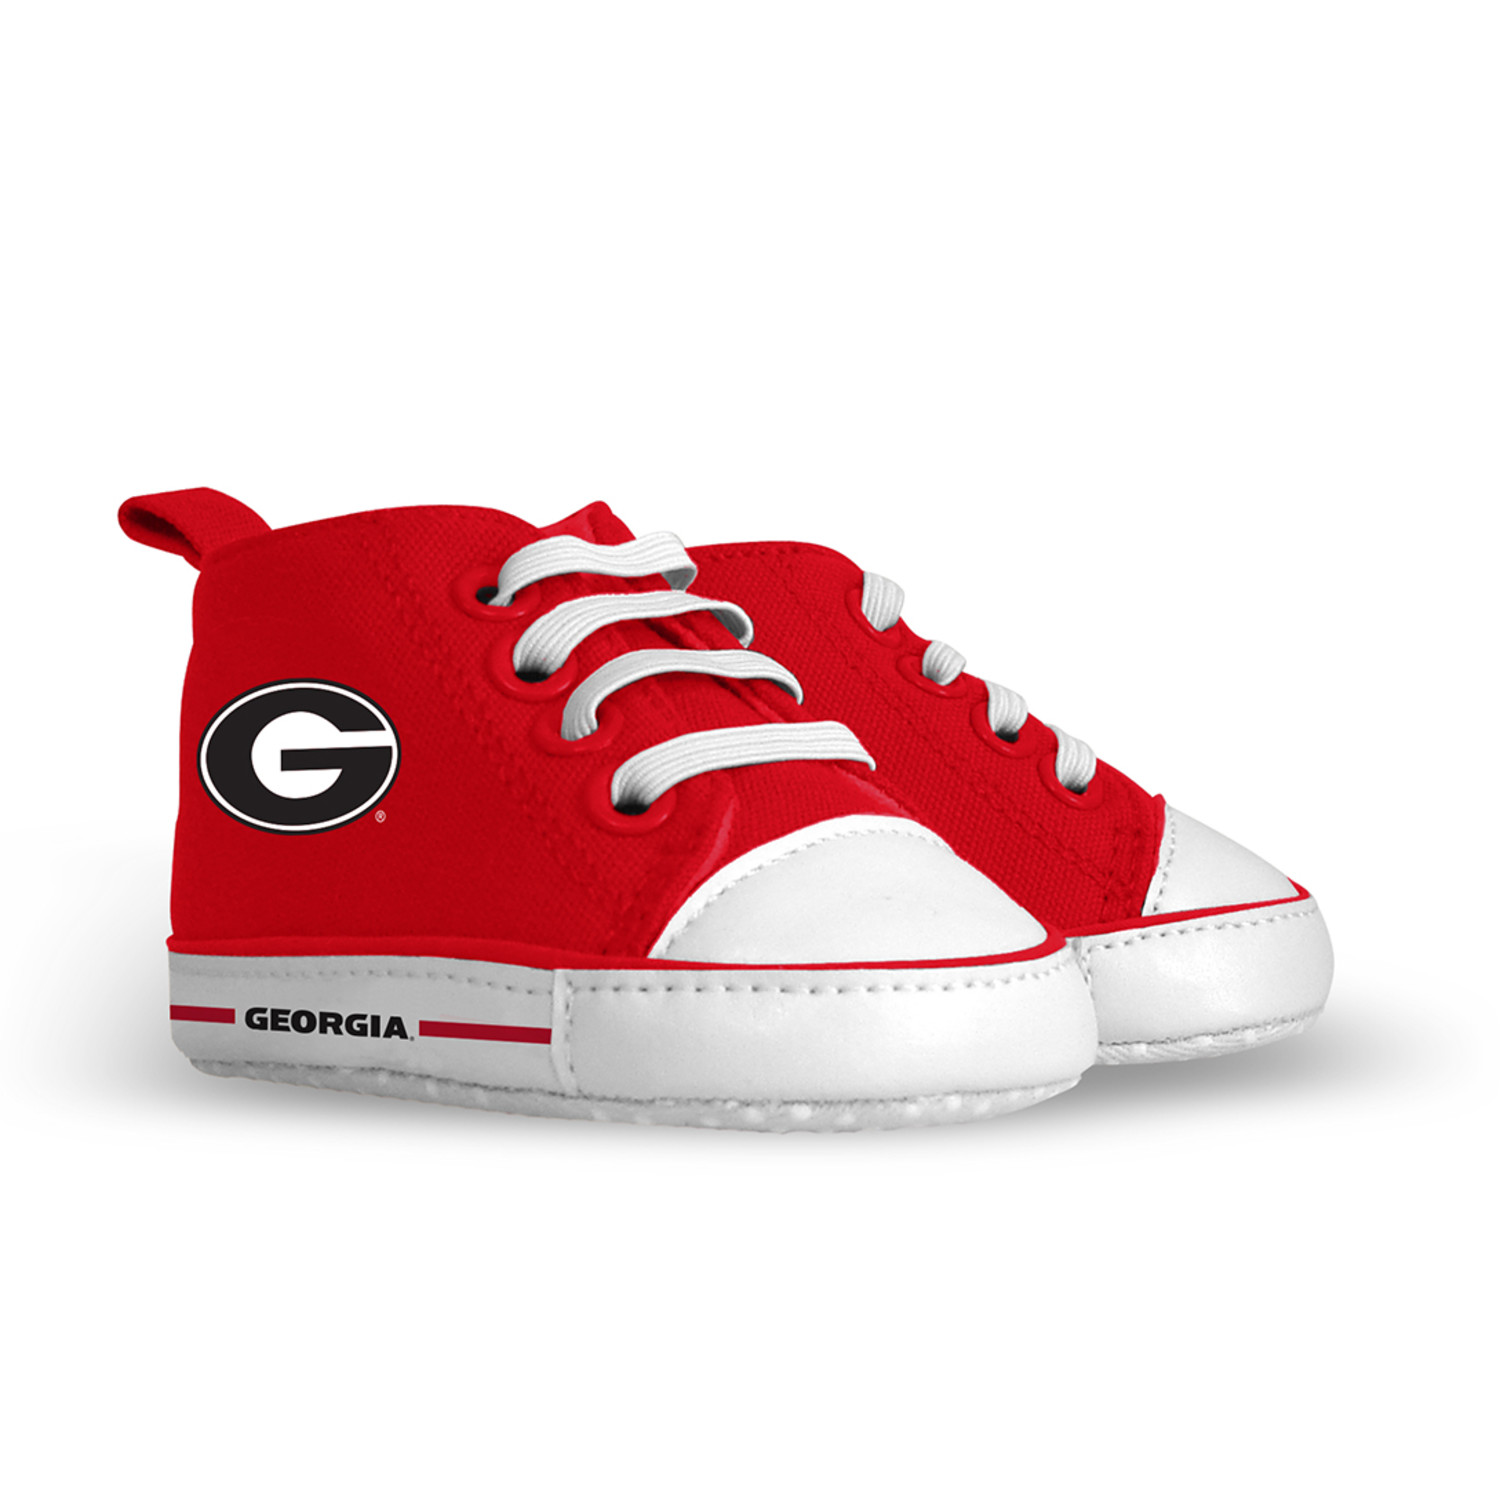 BabyFanatic Pre-Walkers High-Top Unisex Baby Shoes -  NCAA Georgia Bulldogs - image 2 of 5